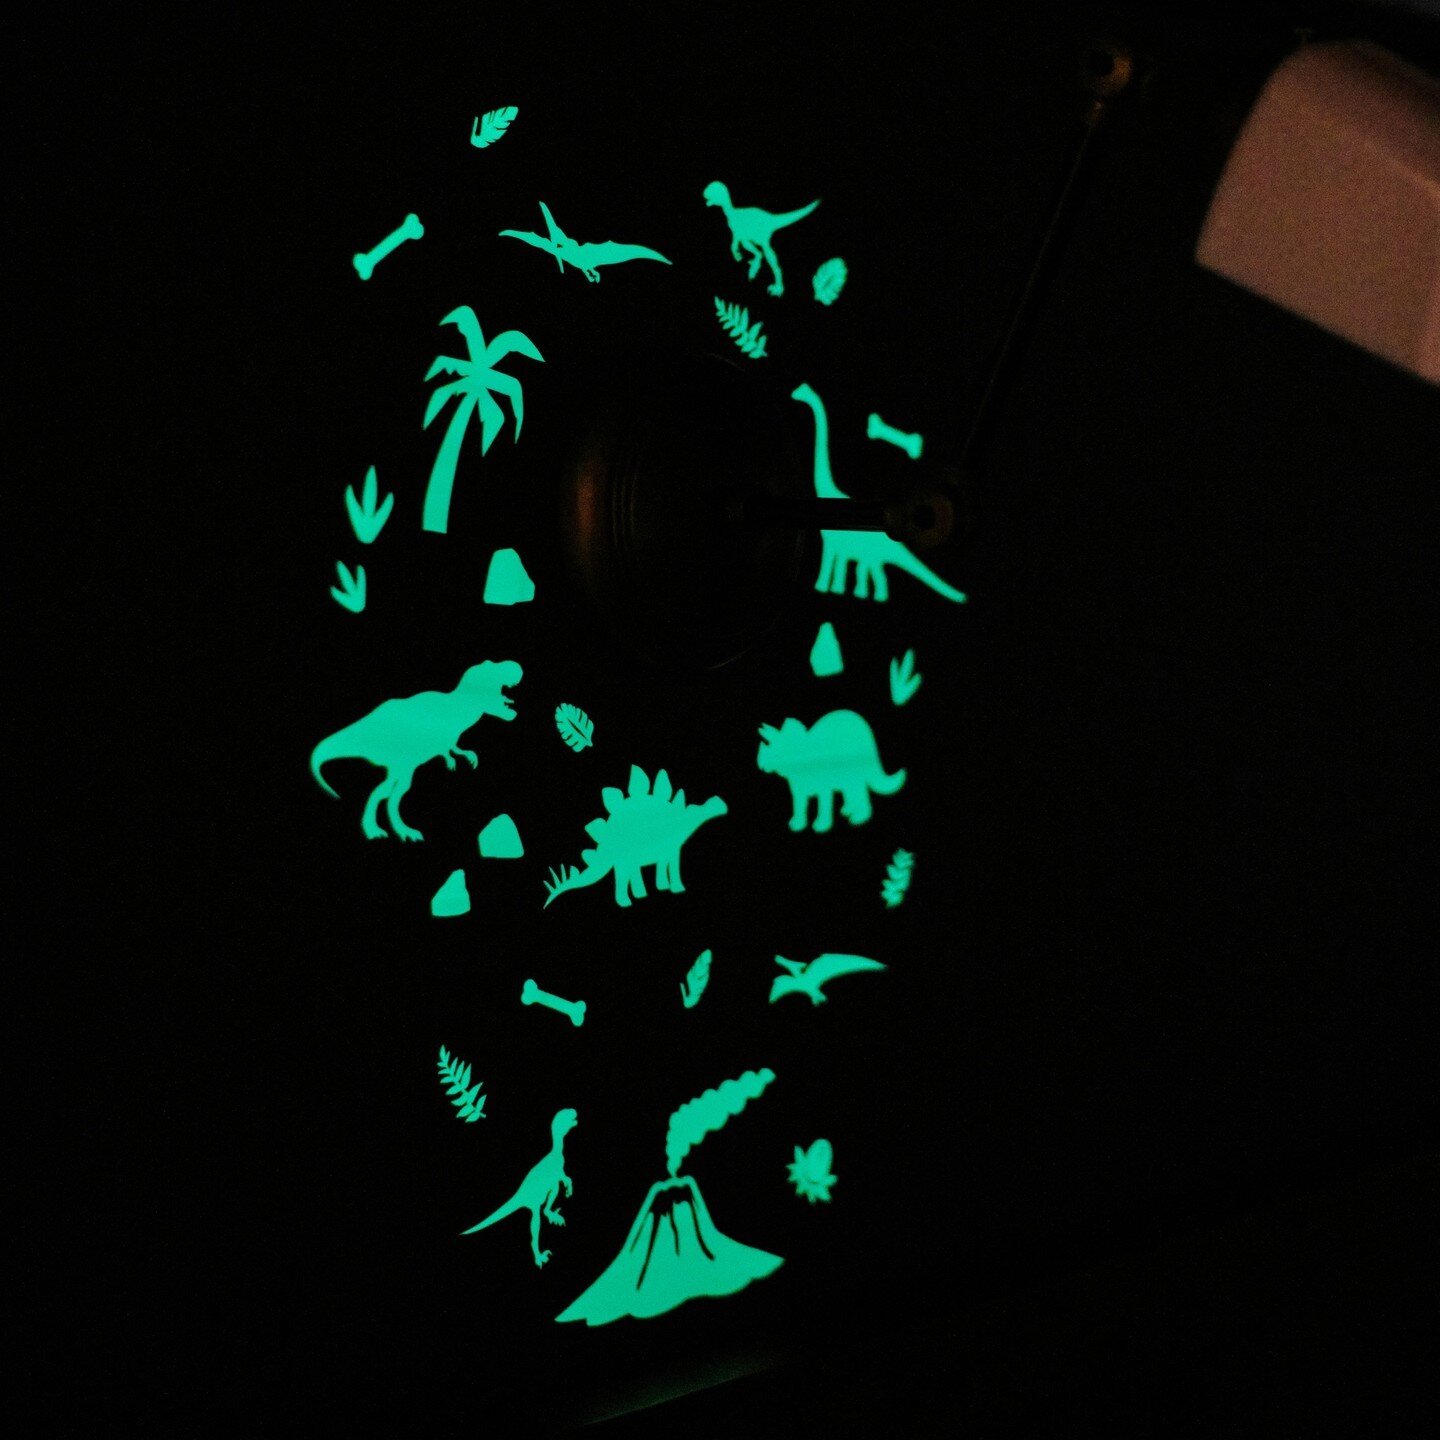 &quot;Gloplay has super awesome glow-in-the-dark stickers! They are removable, re-attachable and great quality!&quot; - Voices from GLO-land